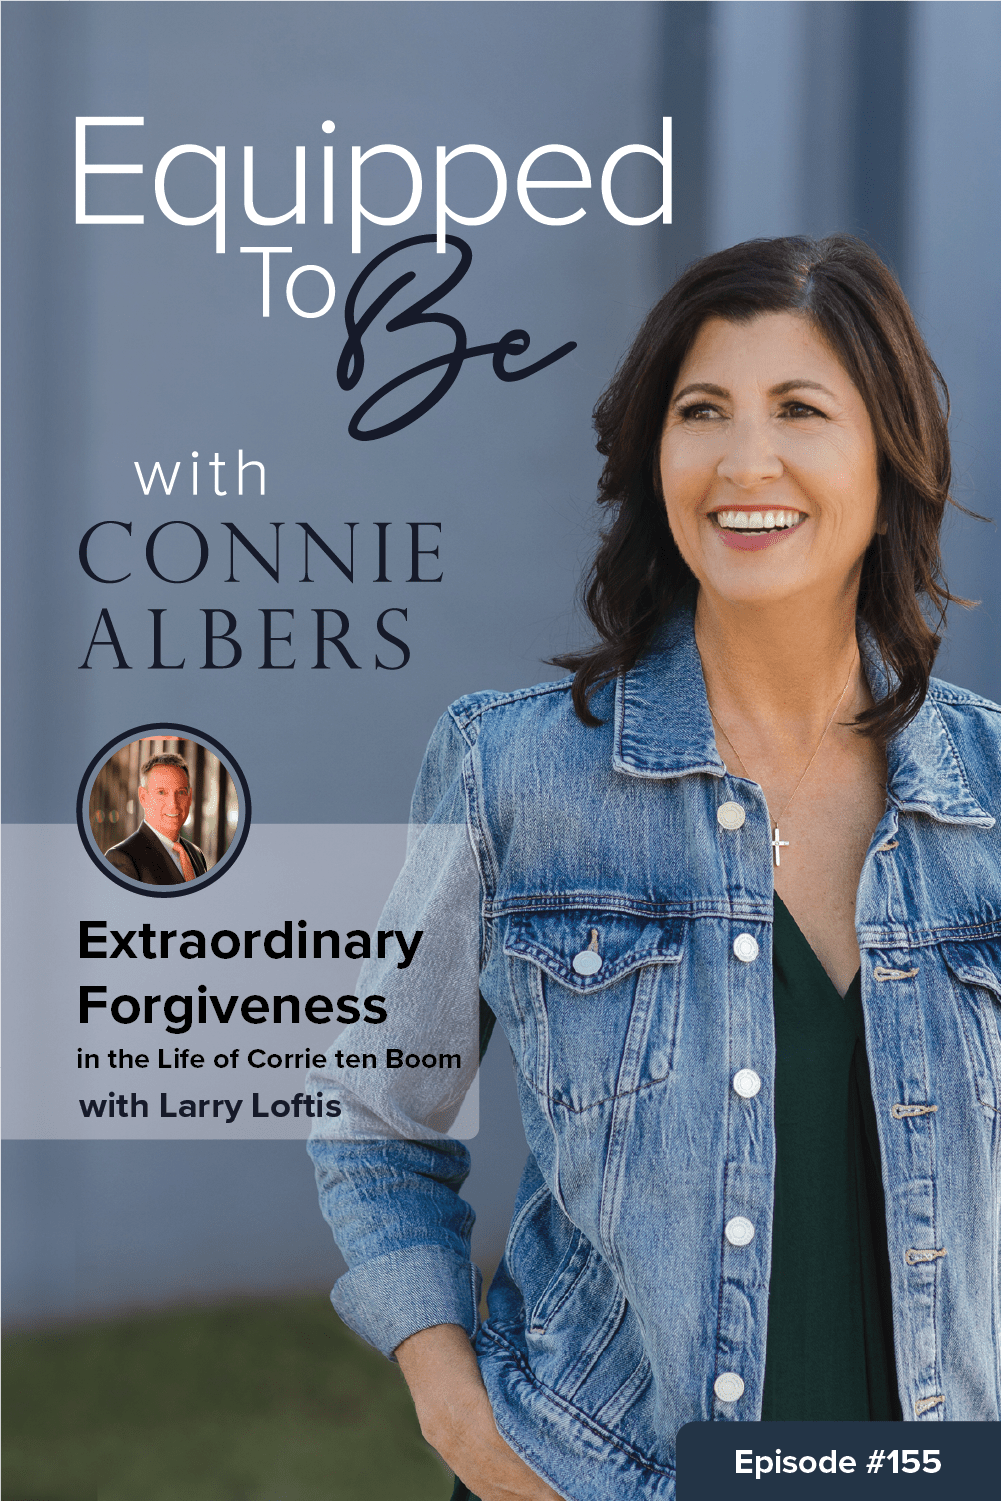 Extraordinary Forgiveness in the Life of Corrie ten Boom with Larry Loftis - ETB #155